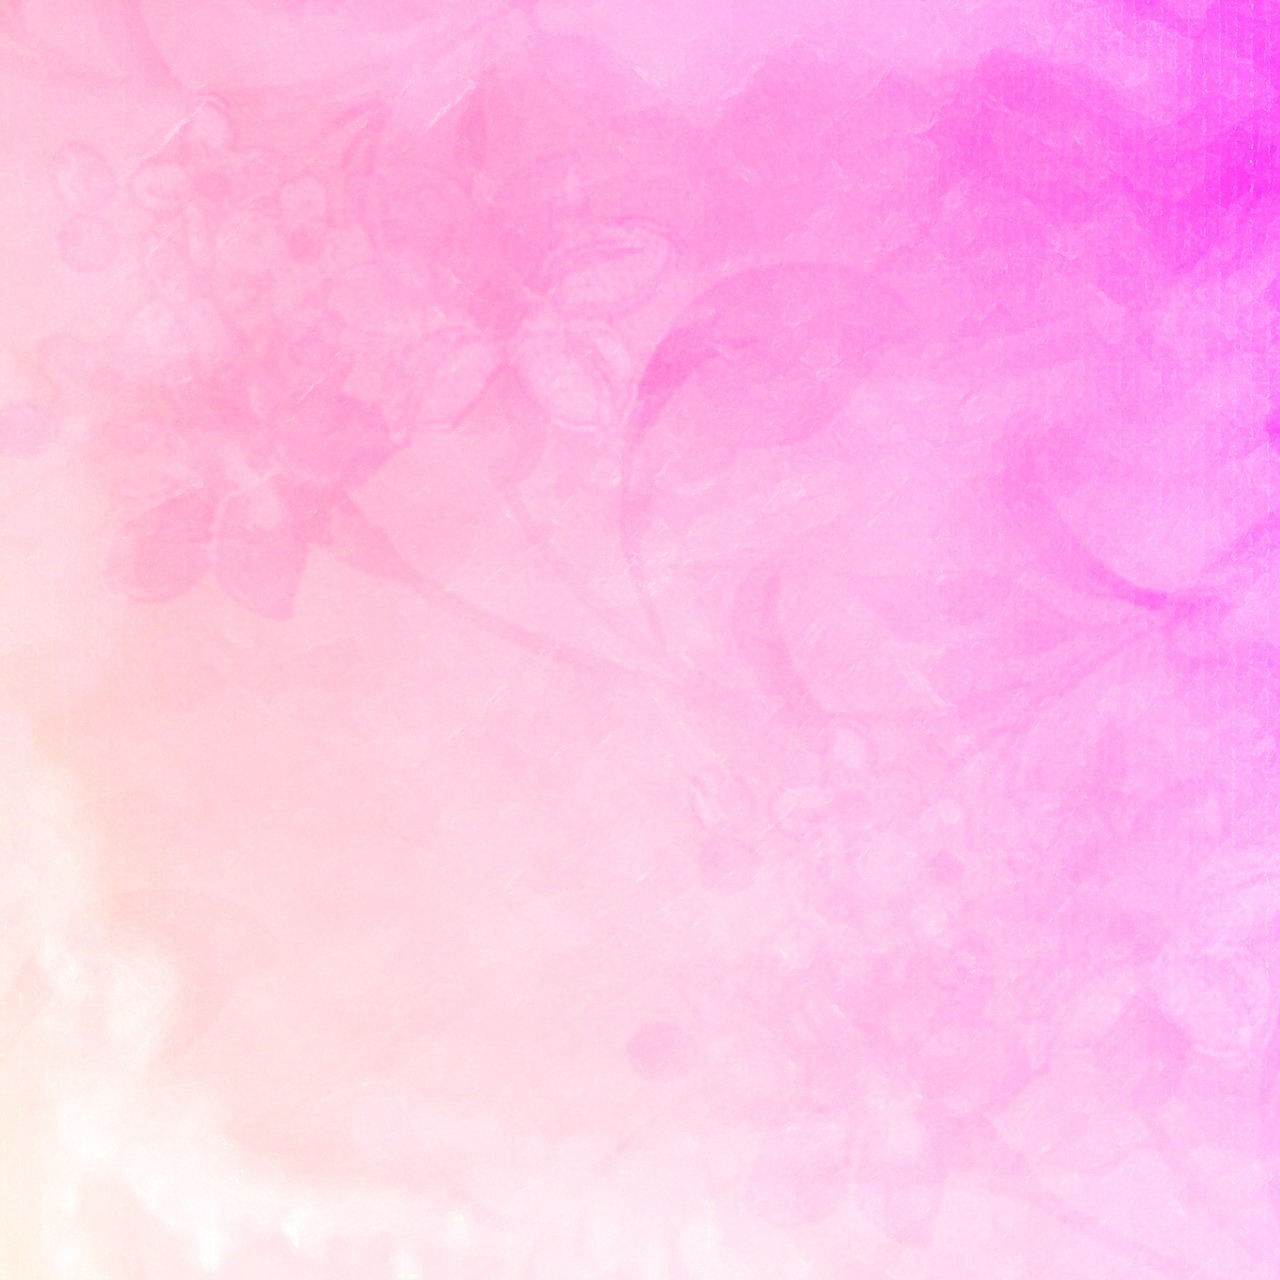 pink paper background free photo